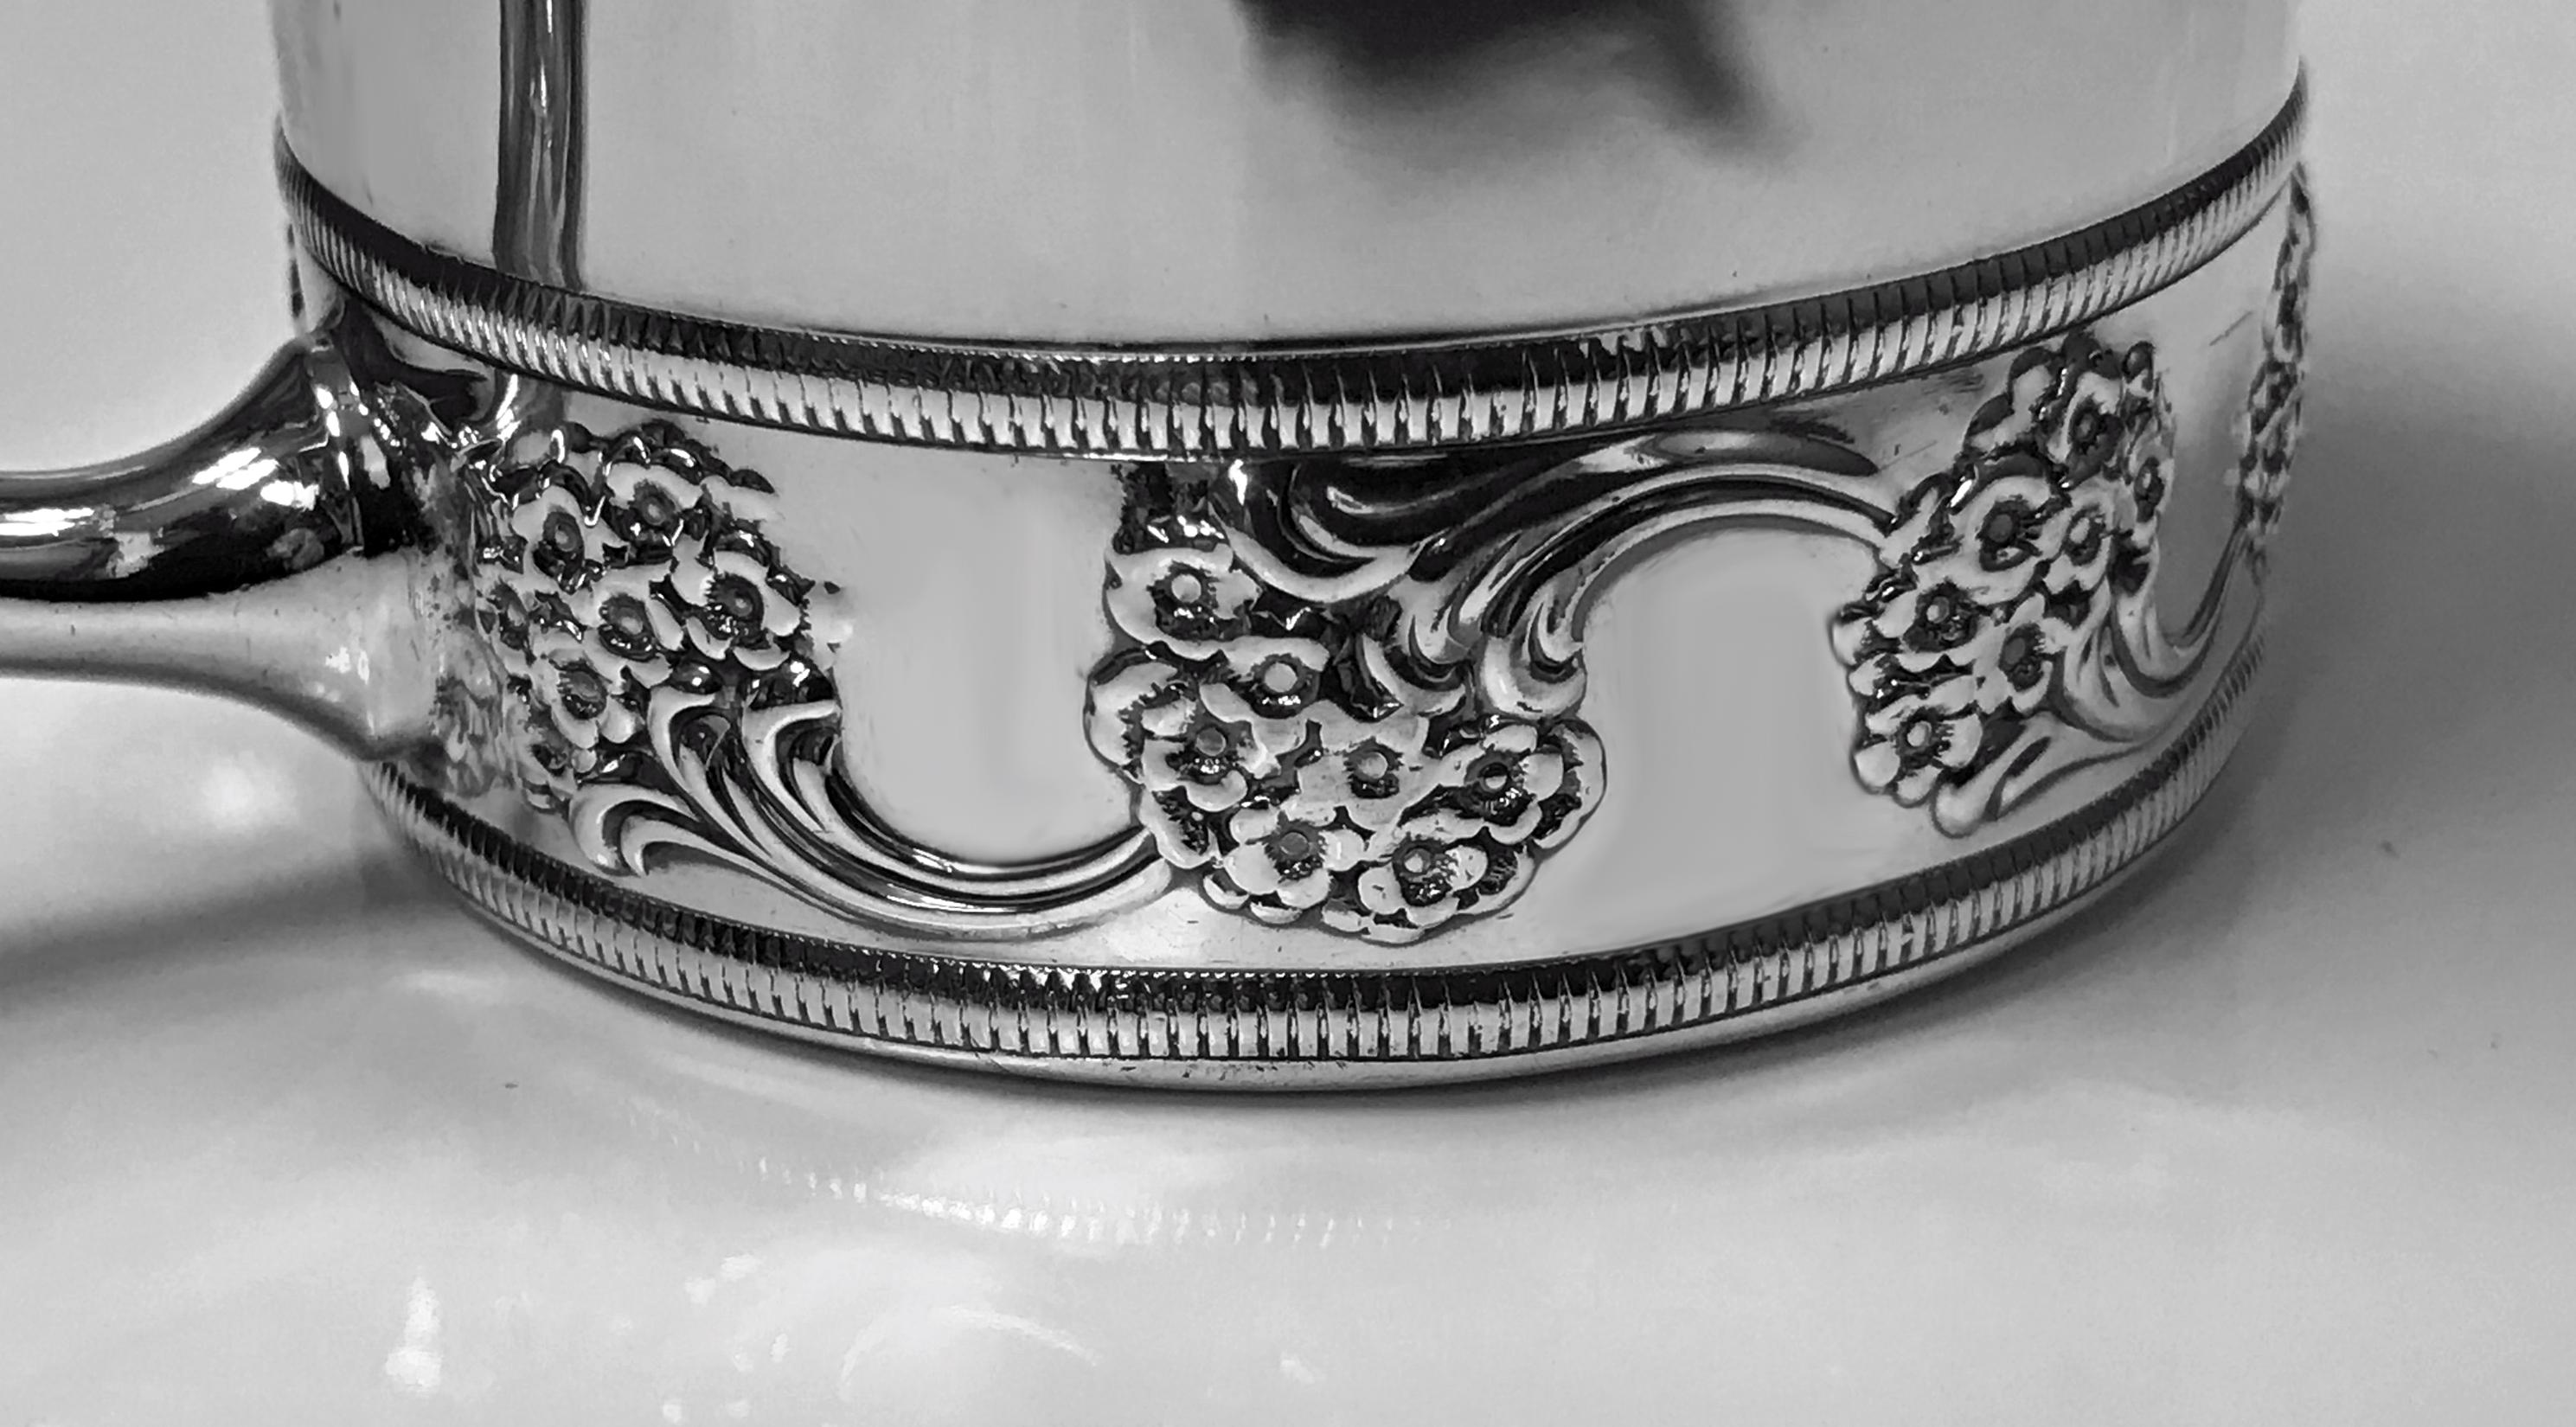 Antique J.E.Caldwell sterling silver cup, circa 1900. Slightly tapered cylindrical body, lower border of embossed scrolling branch leaf design, plain handle. Stamped under base Sterling J.E.Caldwell & Co design number 7846. Weight: 130 grams. 4.17